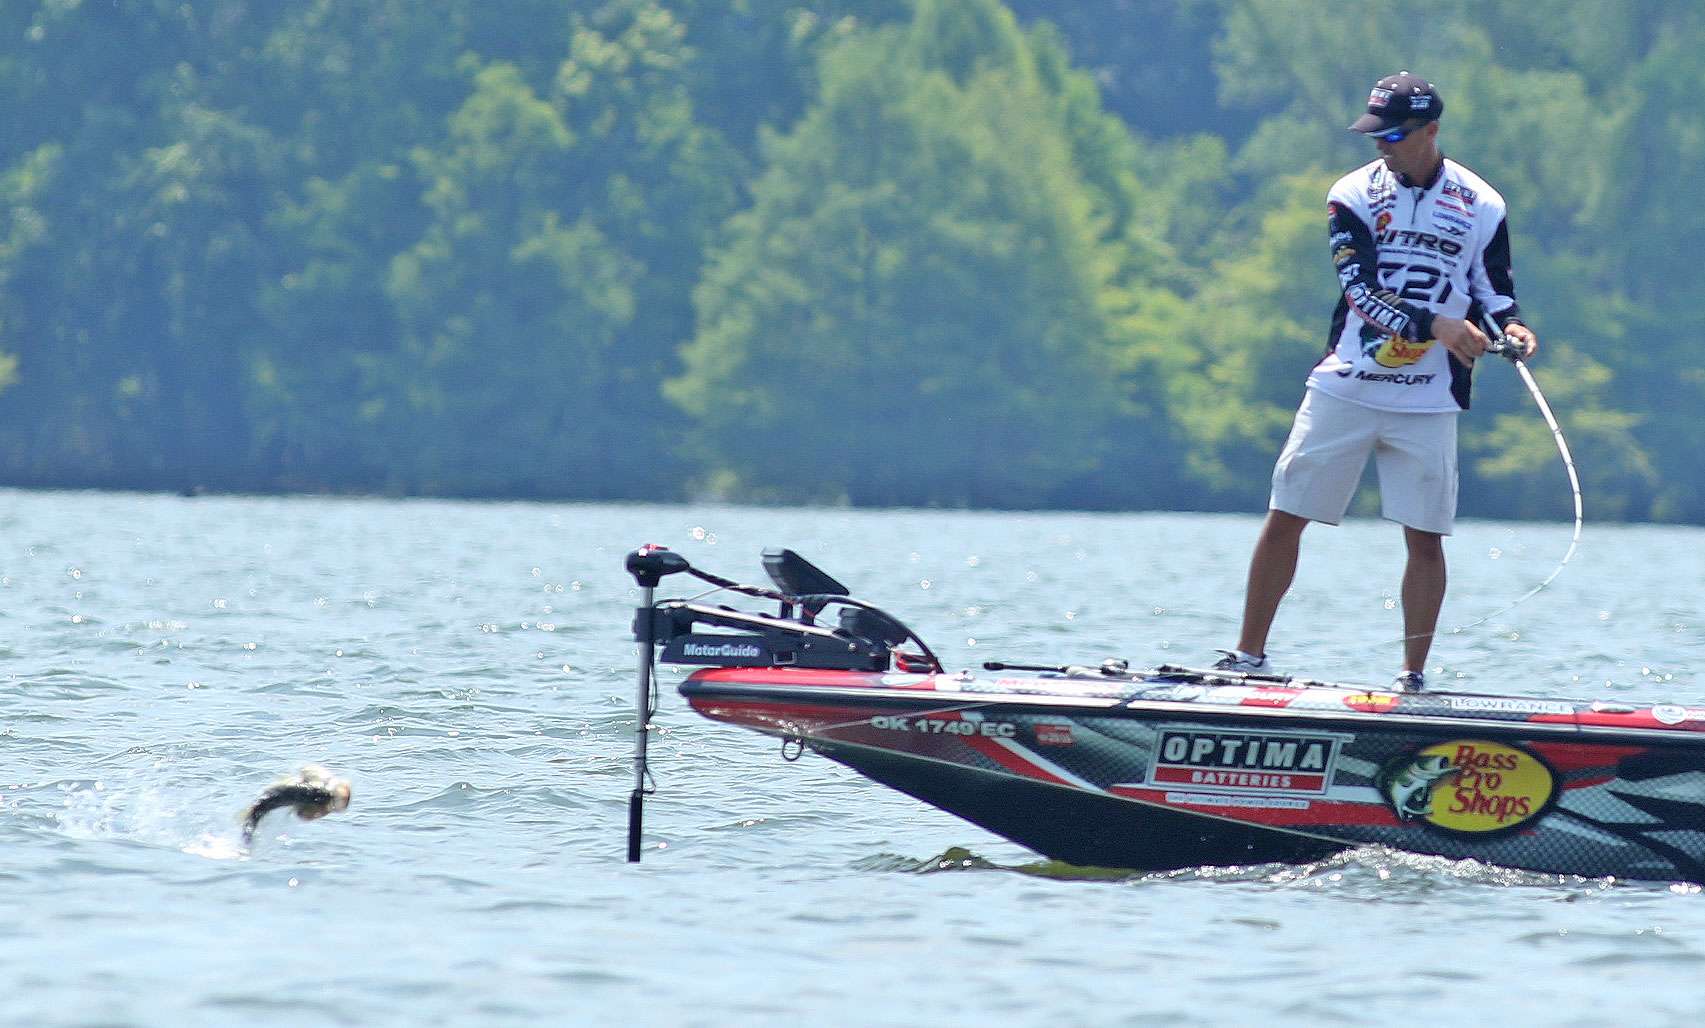 Evers would get back to work catching a few more fish. But at the point with 25 pounds in the boat, the tournament was well within his hands.